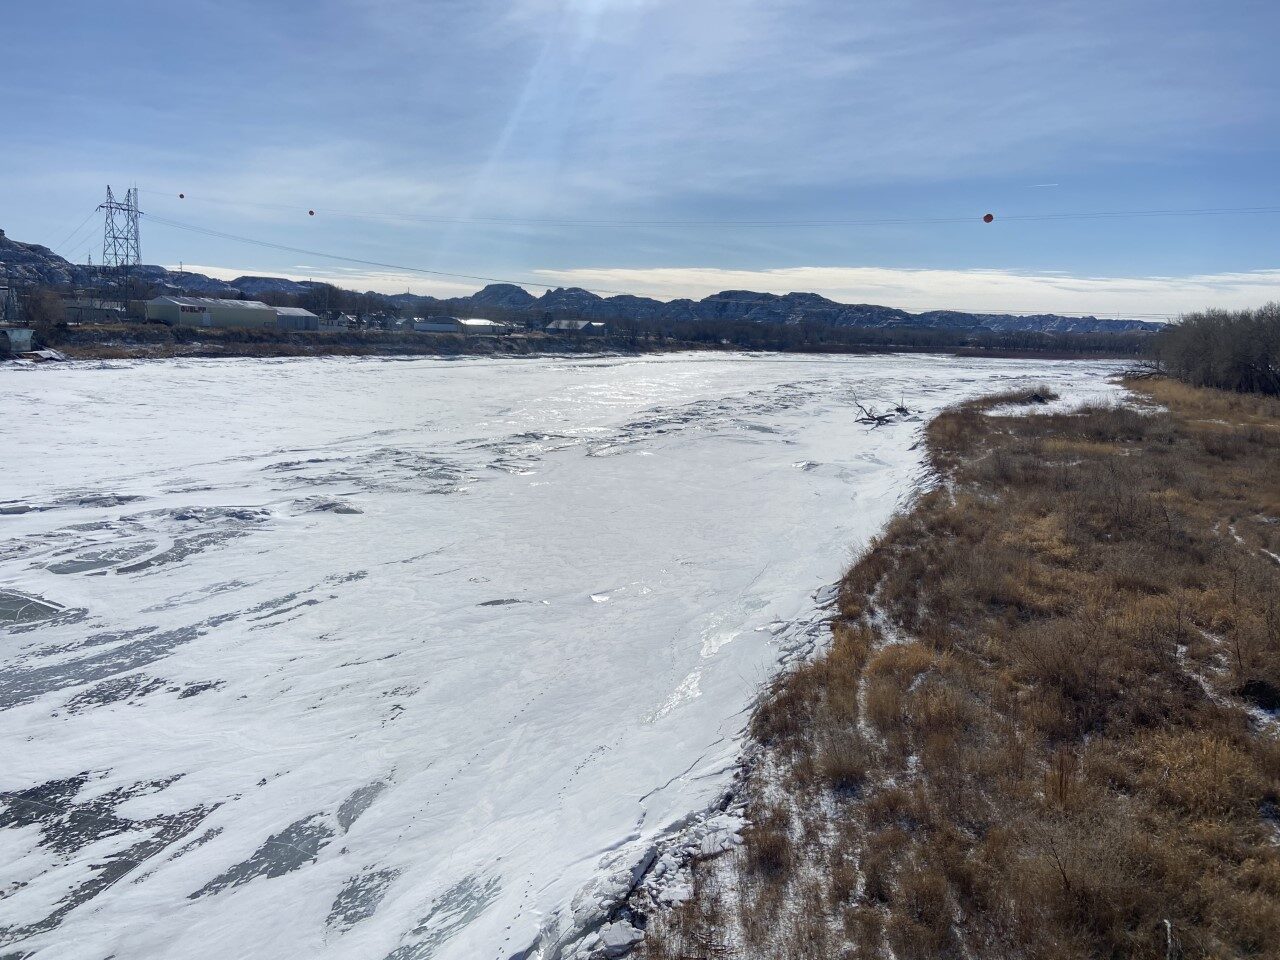 View of the Yellowstone River from the Bell Street Bridge